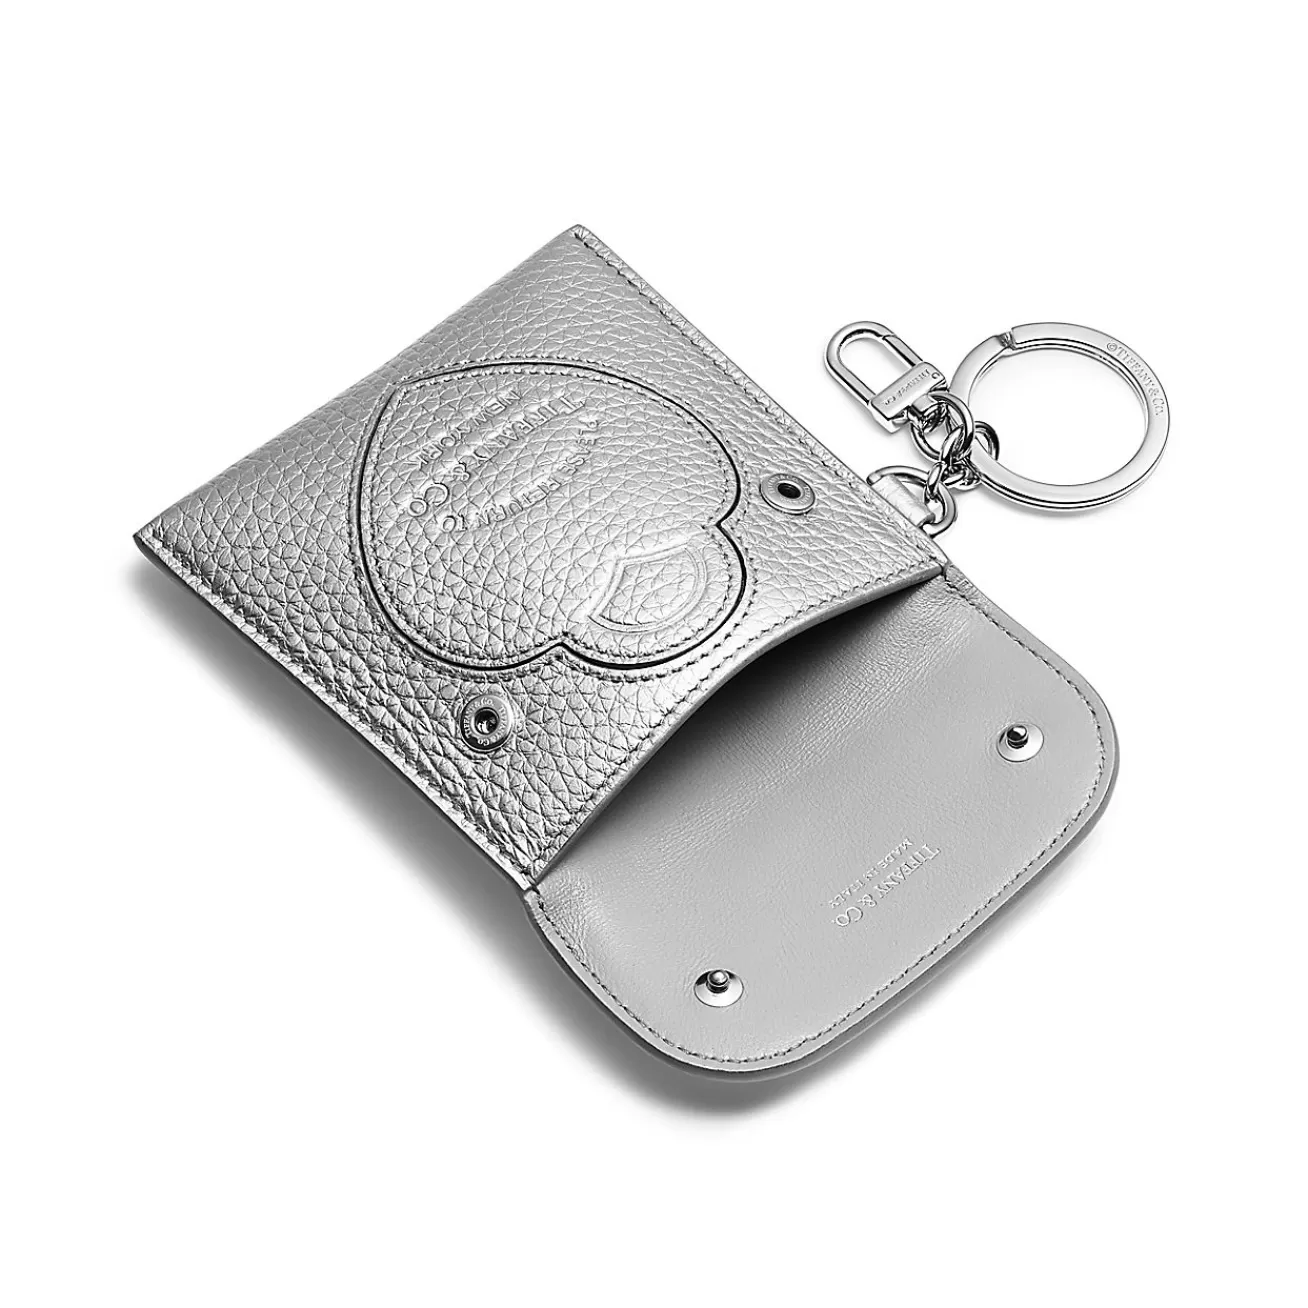 Tiffany & Co. Return to Tiffany® Pouch Bag Charm in Silver-colored Leather | ^Women Business Gifts | Small Leather Goods